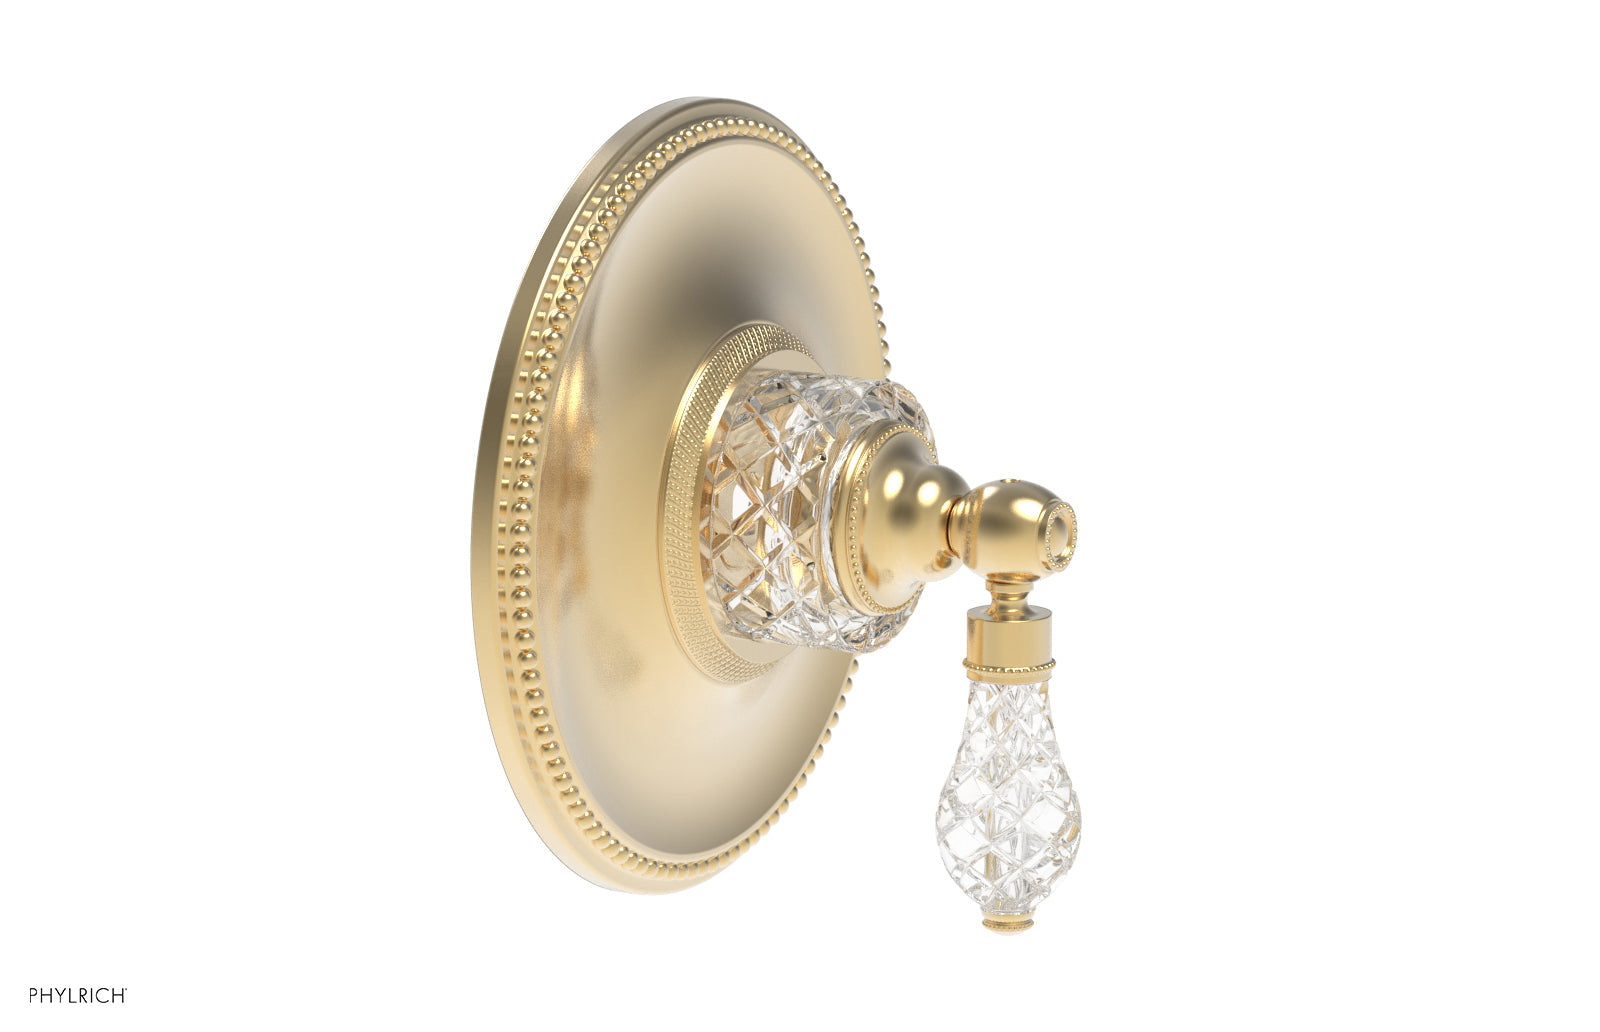 Phylrich REGENT CUT CRYSTAL 1/2" Thermostatic Valve with Volume Control or Diverter